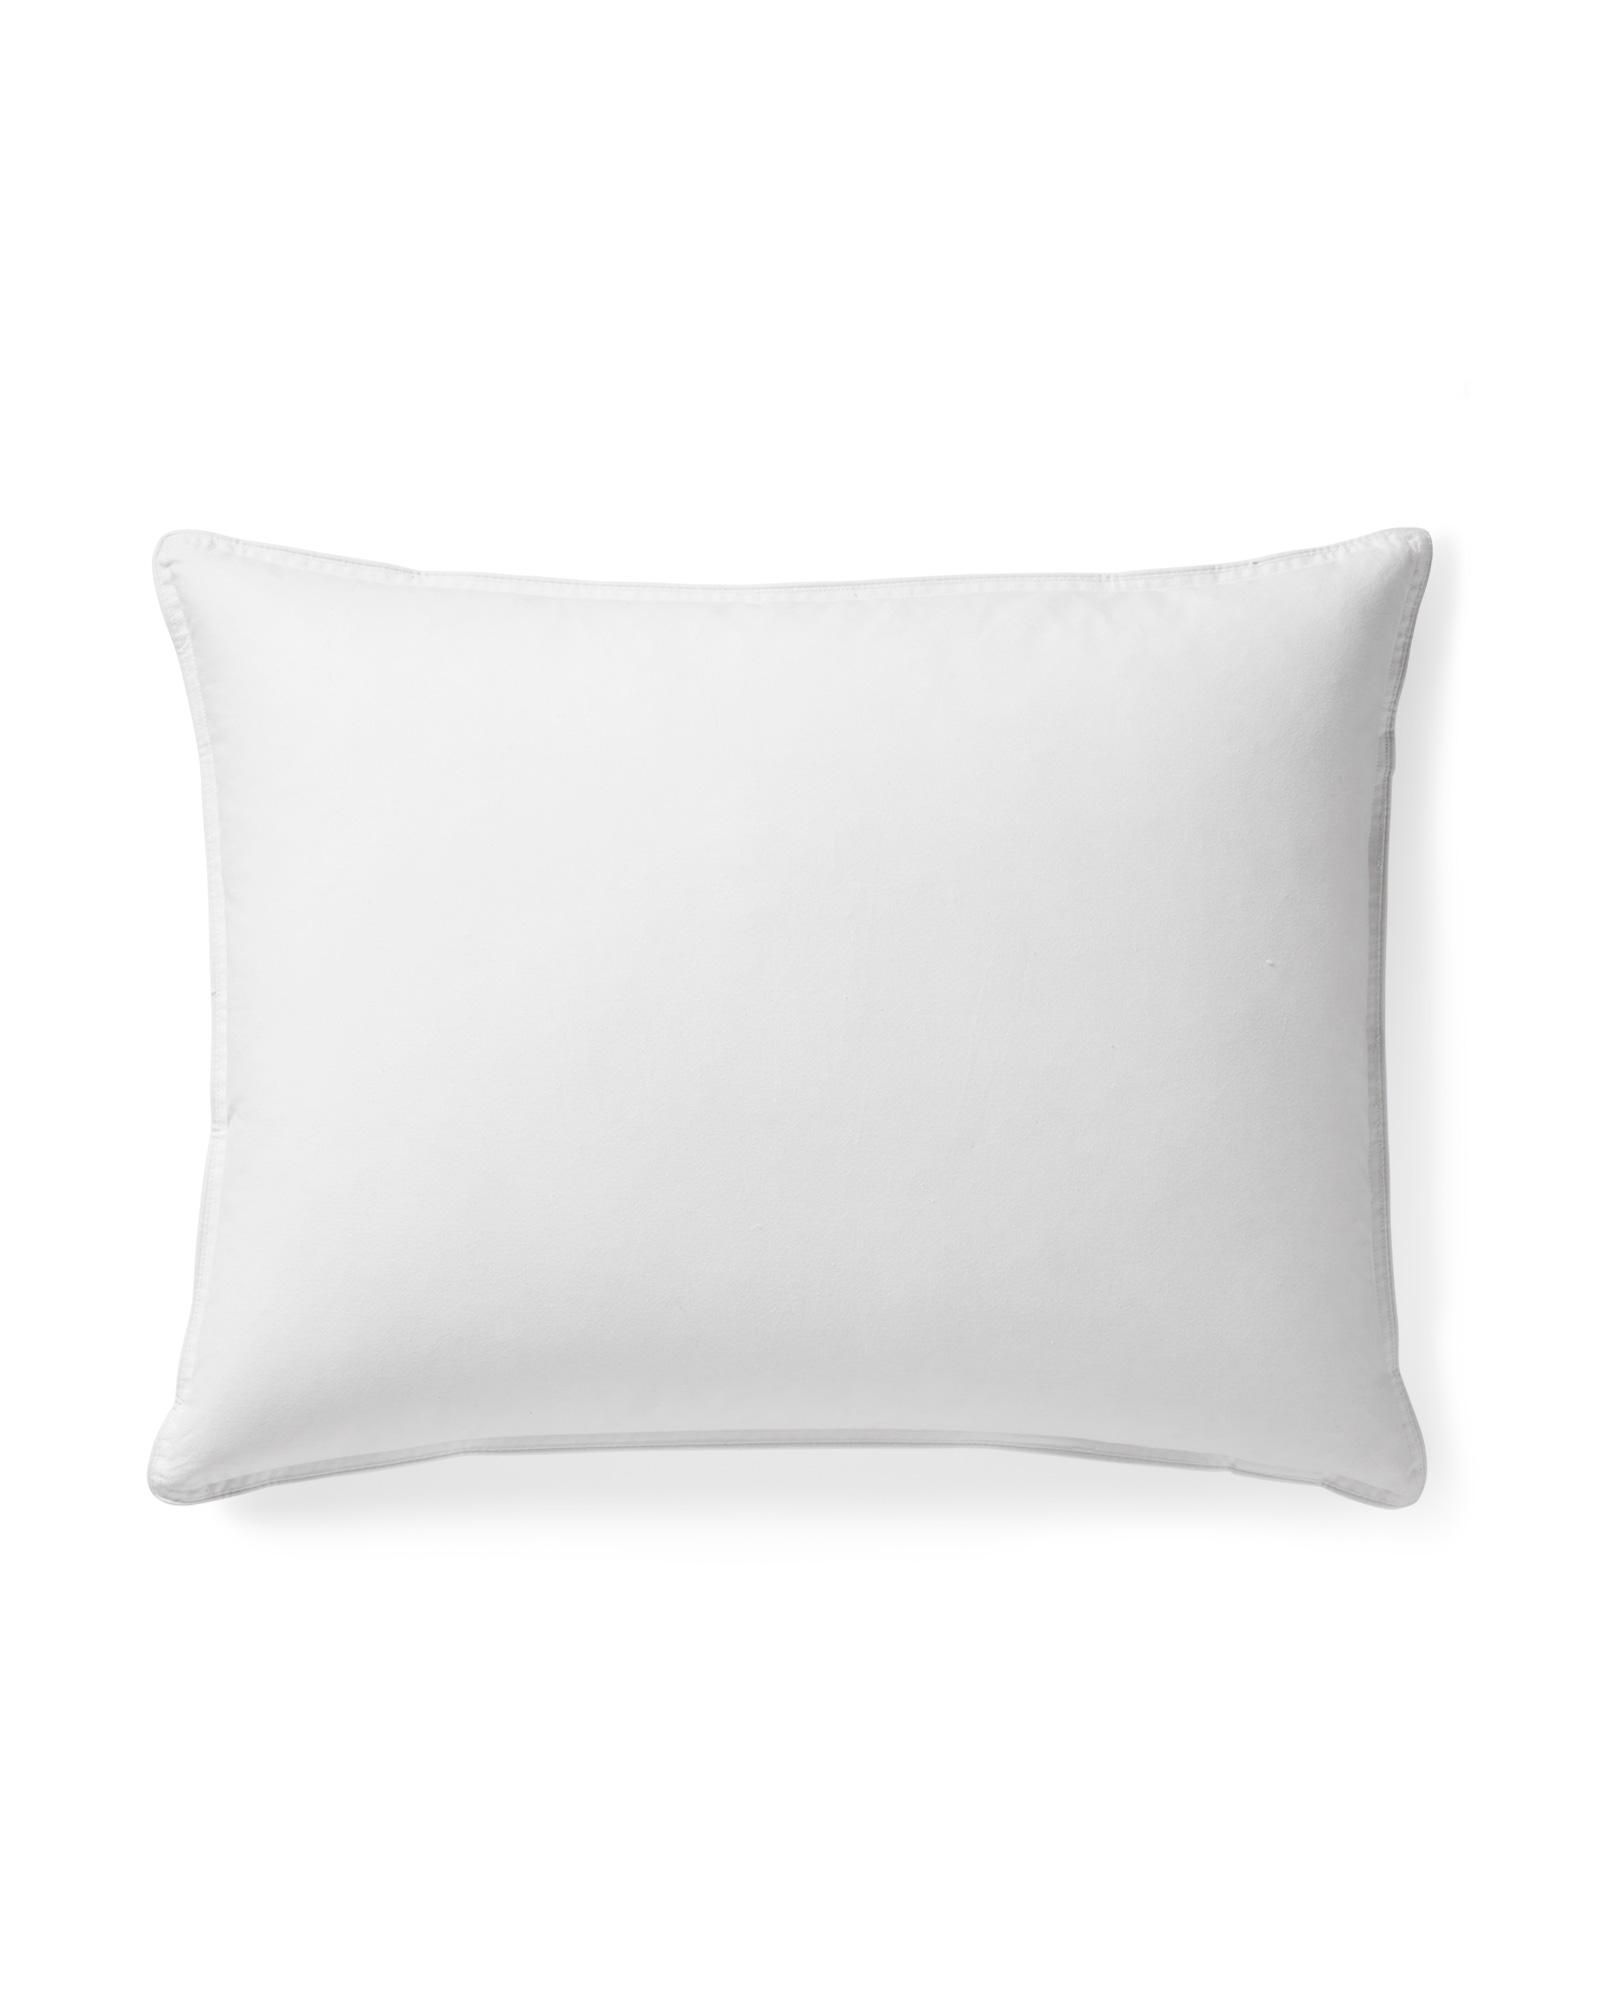 Pillow Inserts | Serena and Lily